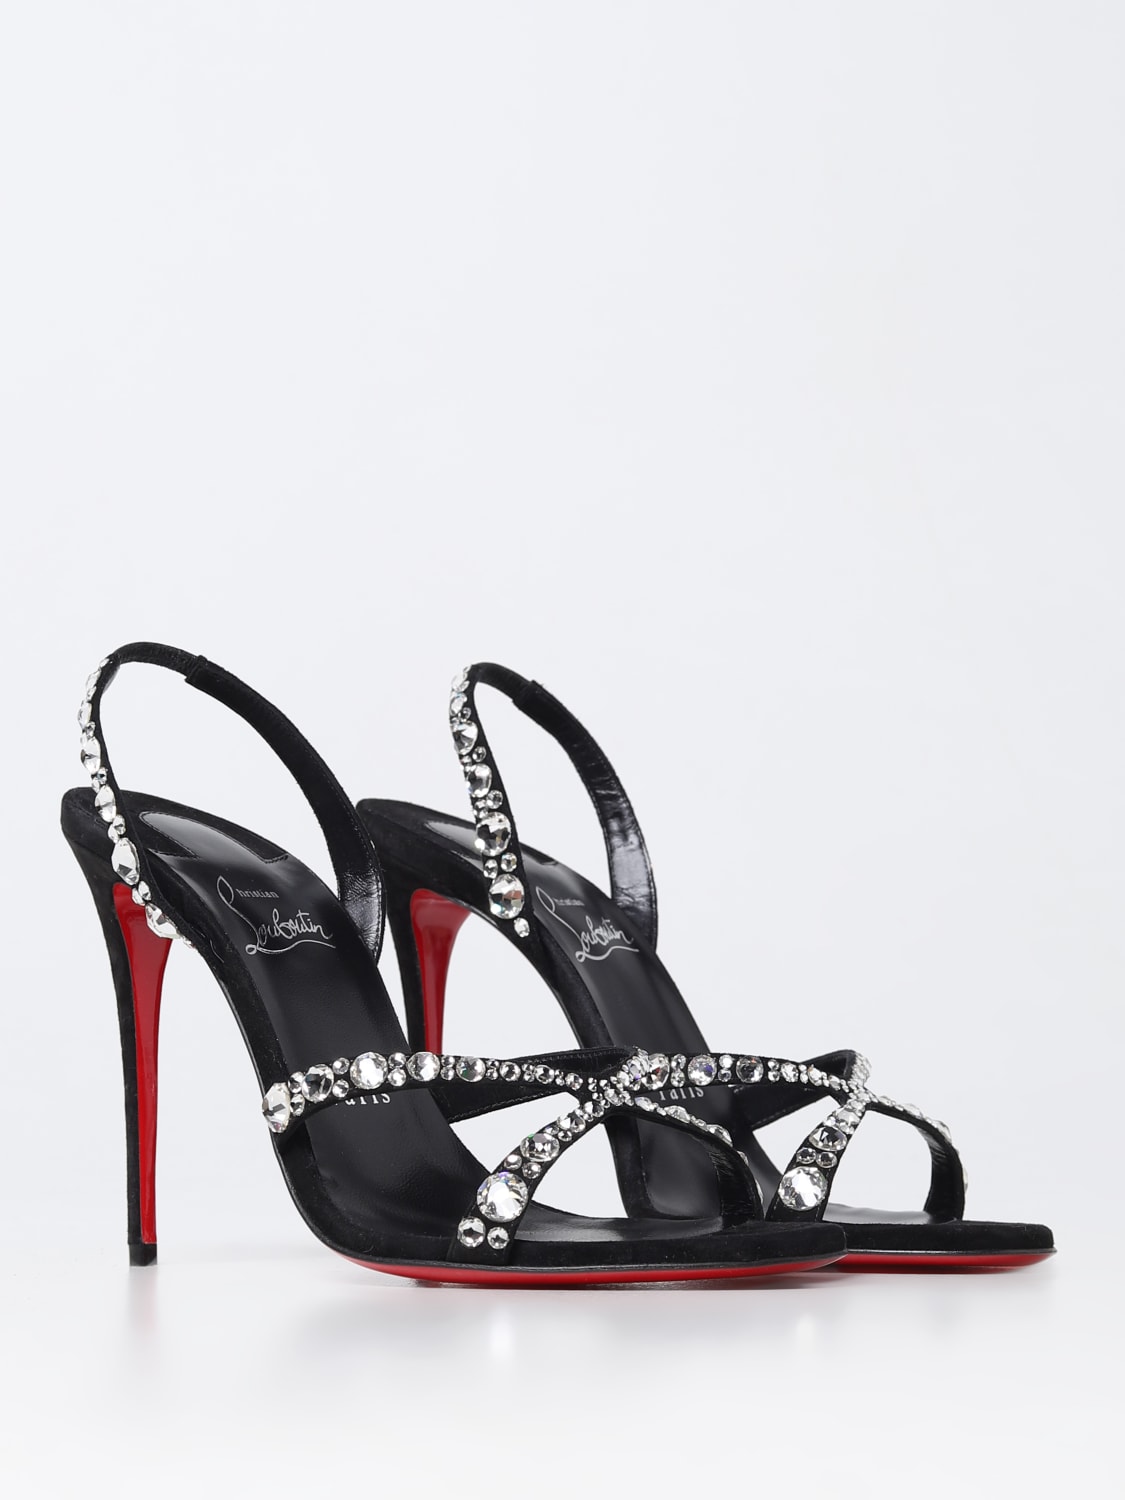 Sale Now On At Christian Louboutin Outlet Boutique UK